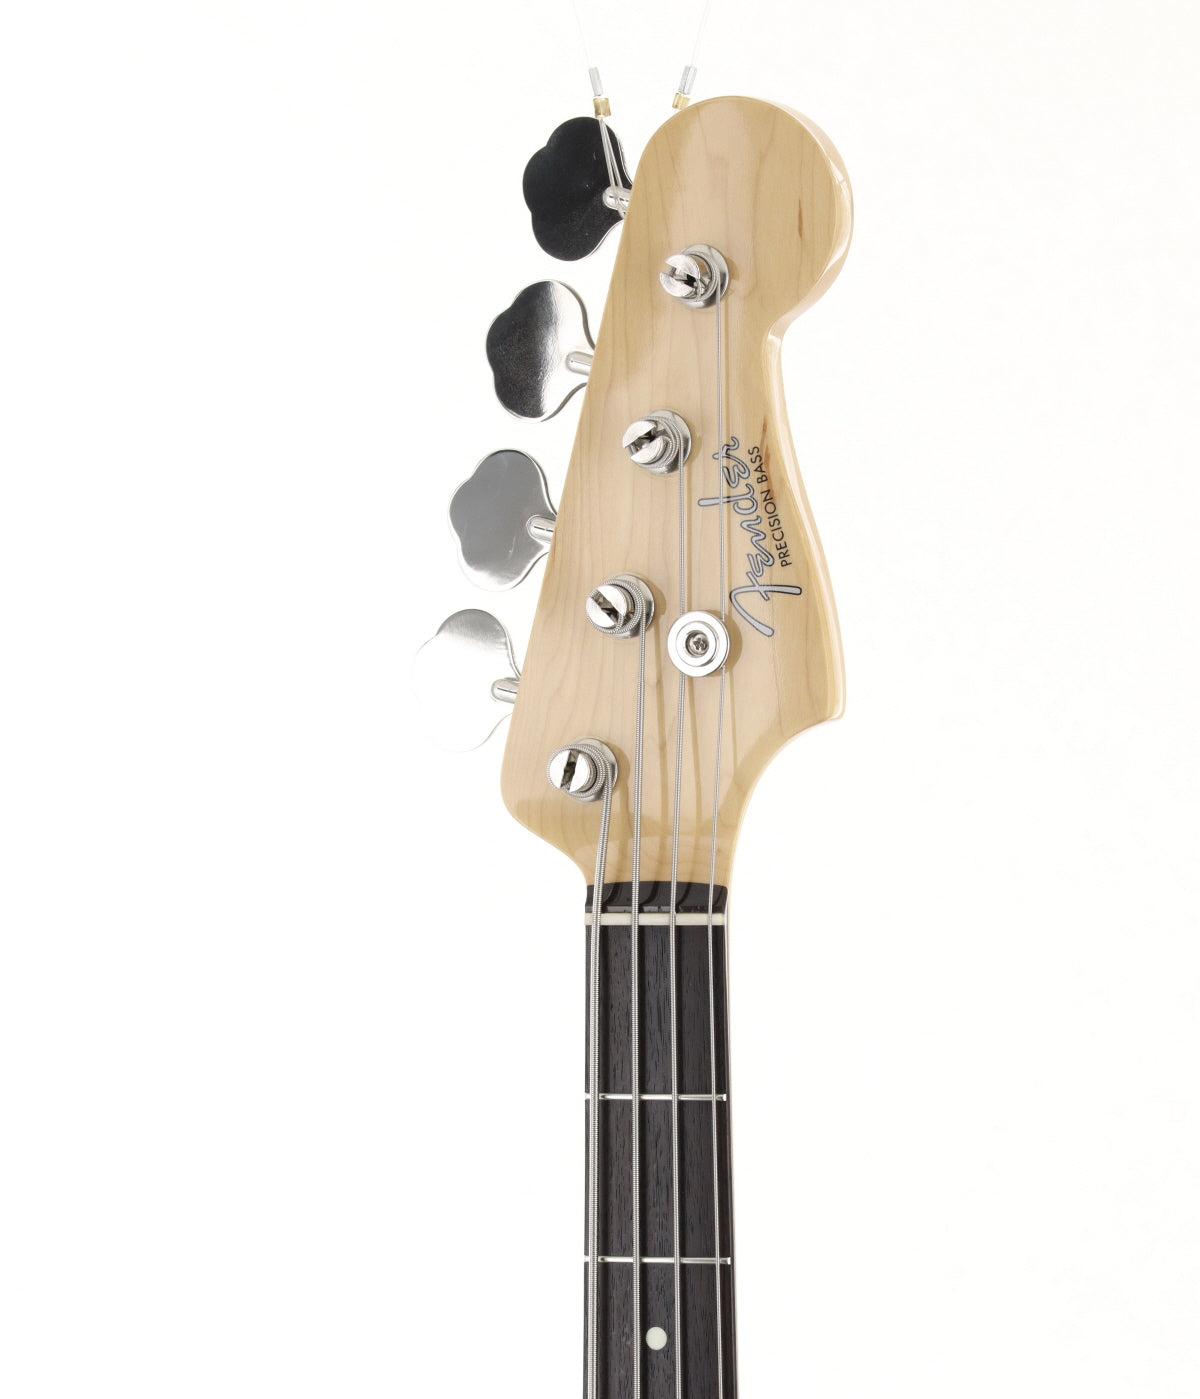 [SN JD2202402] USED Fender / Made in Japan Traditional 60s Precision Bass Rosewood Fingerboard 3-Color Sunburst [03]